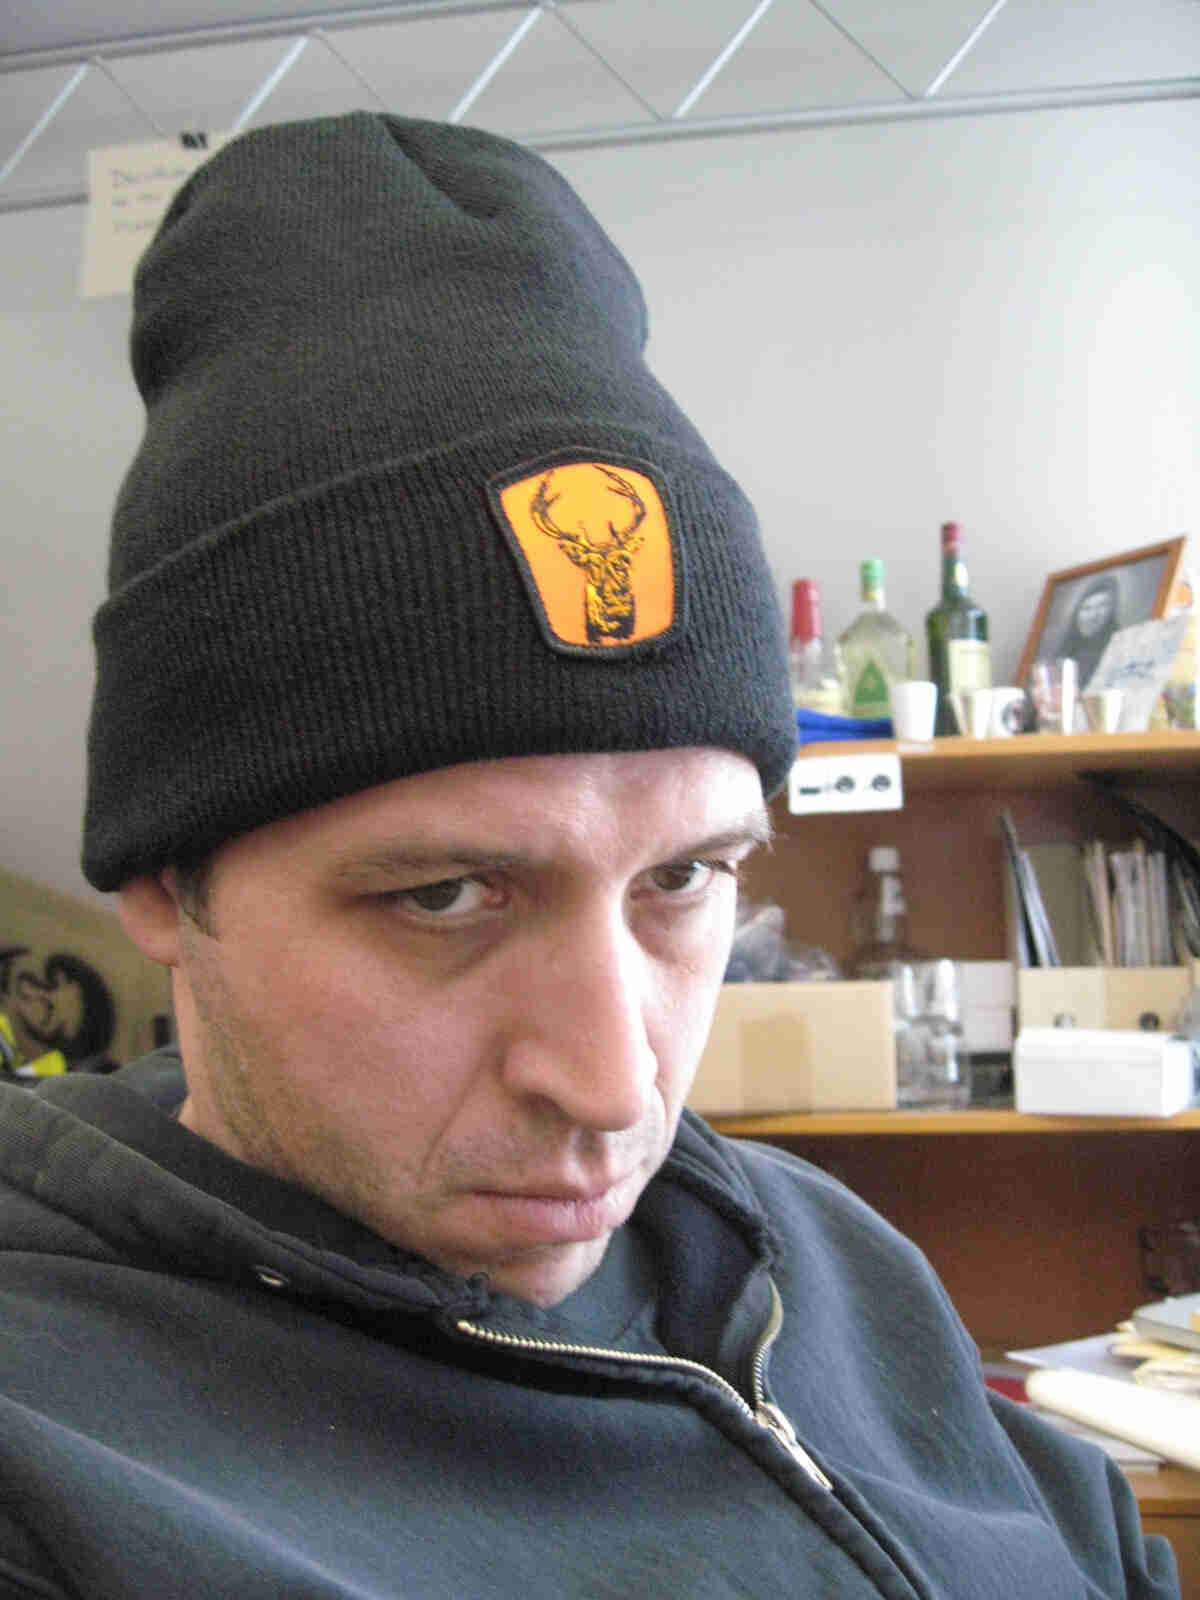 Headshot shot of a person with a grumpy face and wearing a stocking cap, in an office setting